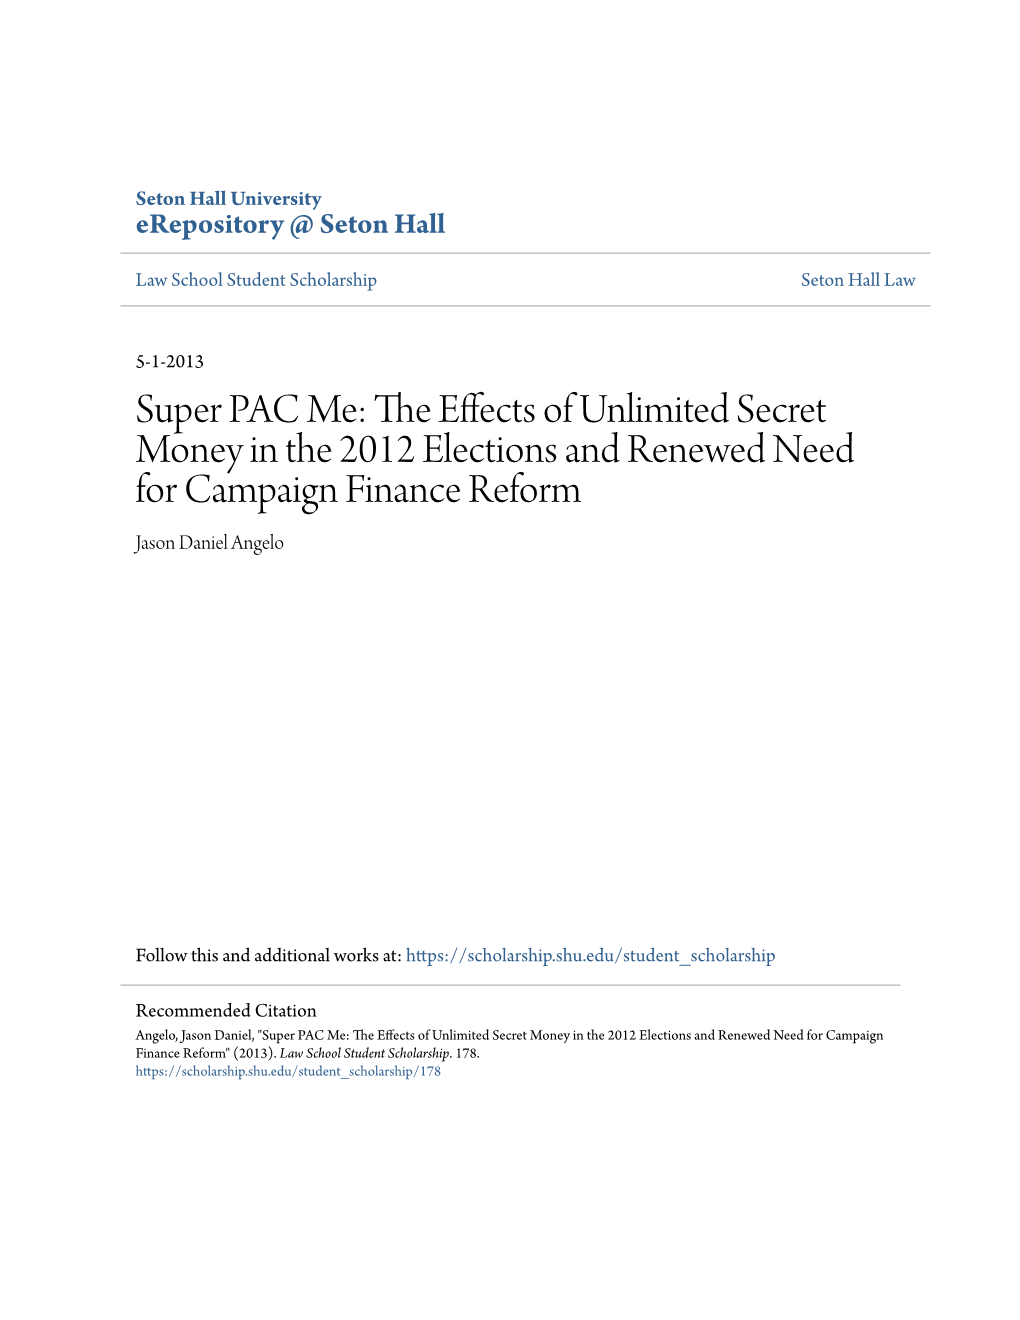 Super PAC Me: the Effects of Unlimited Secret Money in the 2012 Elections and Renewed Need for Campaign Finance Reform" (2013)